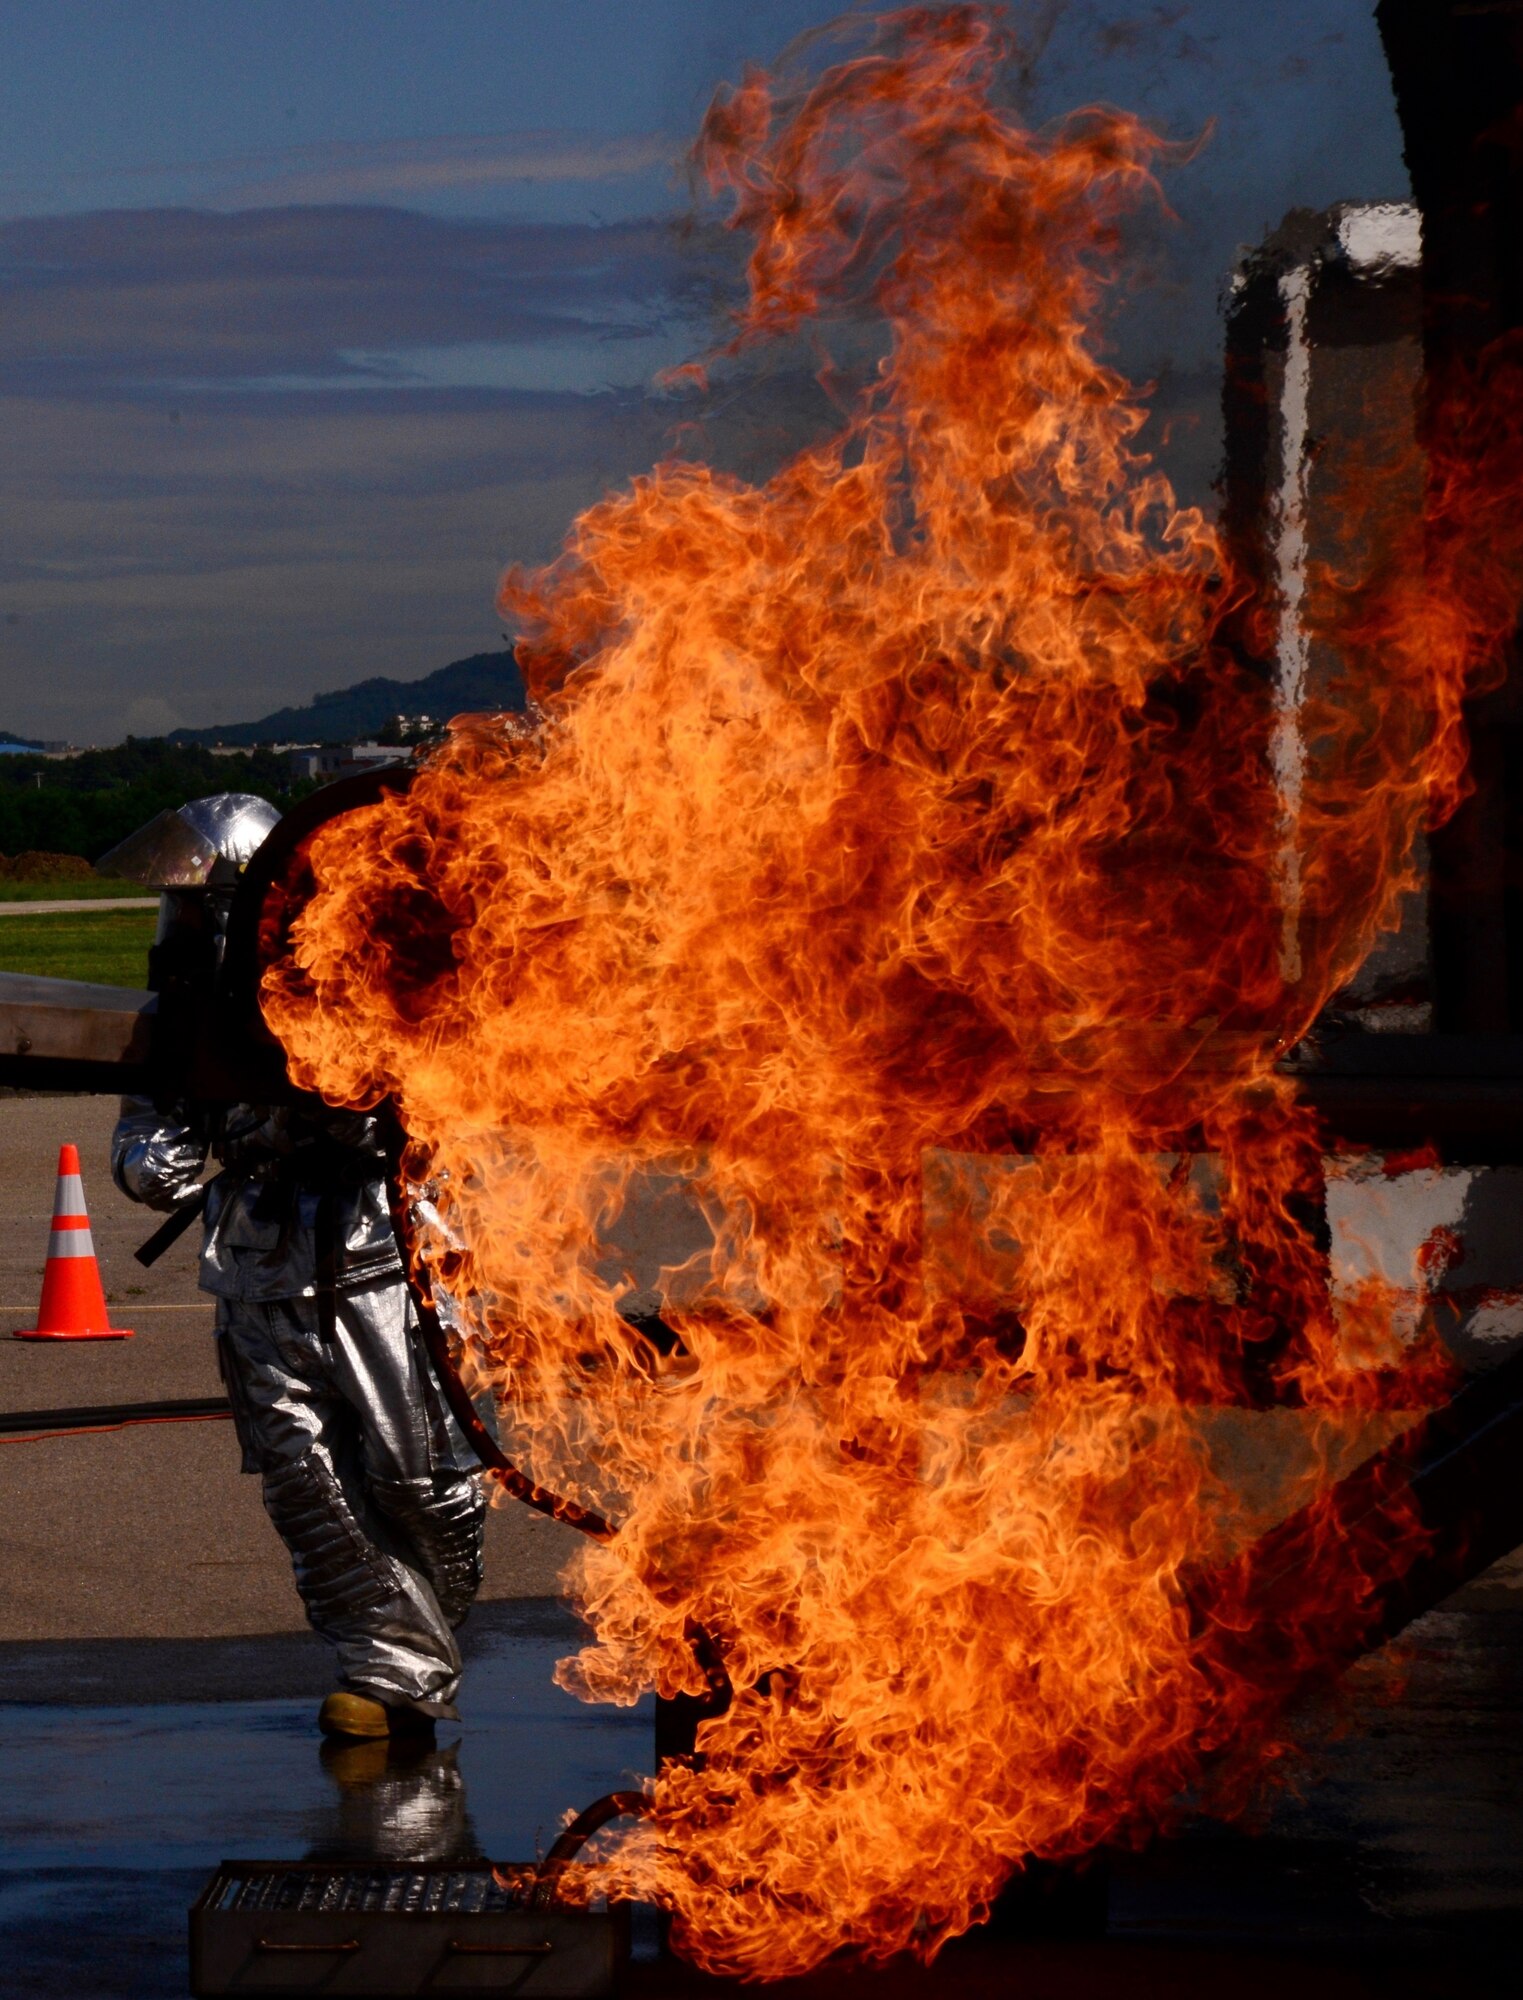 Staff Sgt. Michael White, 51st Civil Engineer Squadron crew chief, stands behind an aircraft fire during a training event Aug 26, 2015, at Osan Air Base, Republic of Korea. The outside areas of the practice aircraft are lit up to test how the firefighters handle extinguishing fires outside the simulated crashed aircraft, then inside the cockpit where pilots are and finally, inside the cargo area to try and save or recover any equipment. (U. S. Air Force photo by Staff Sgt. Benjamin Sutton) 